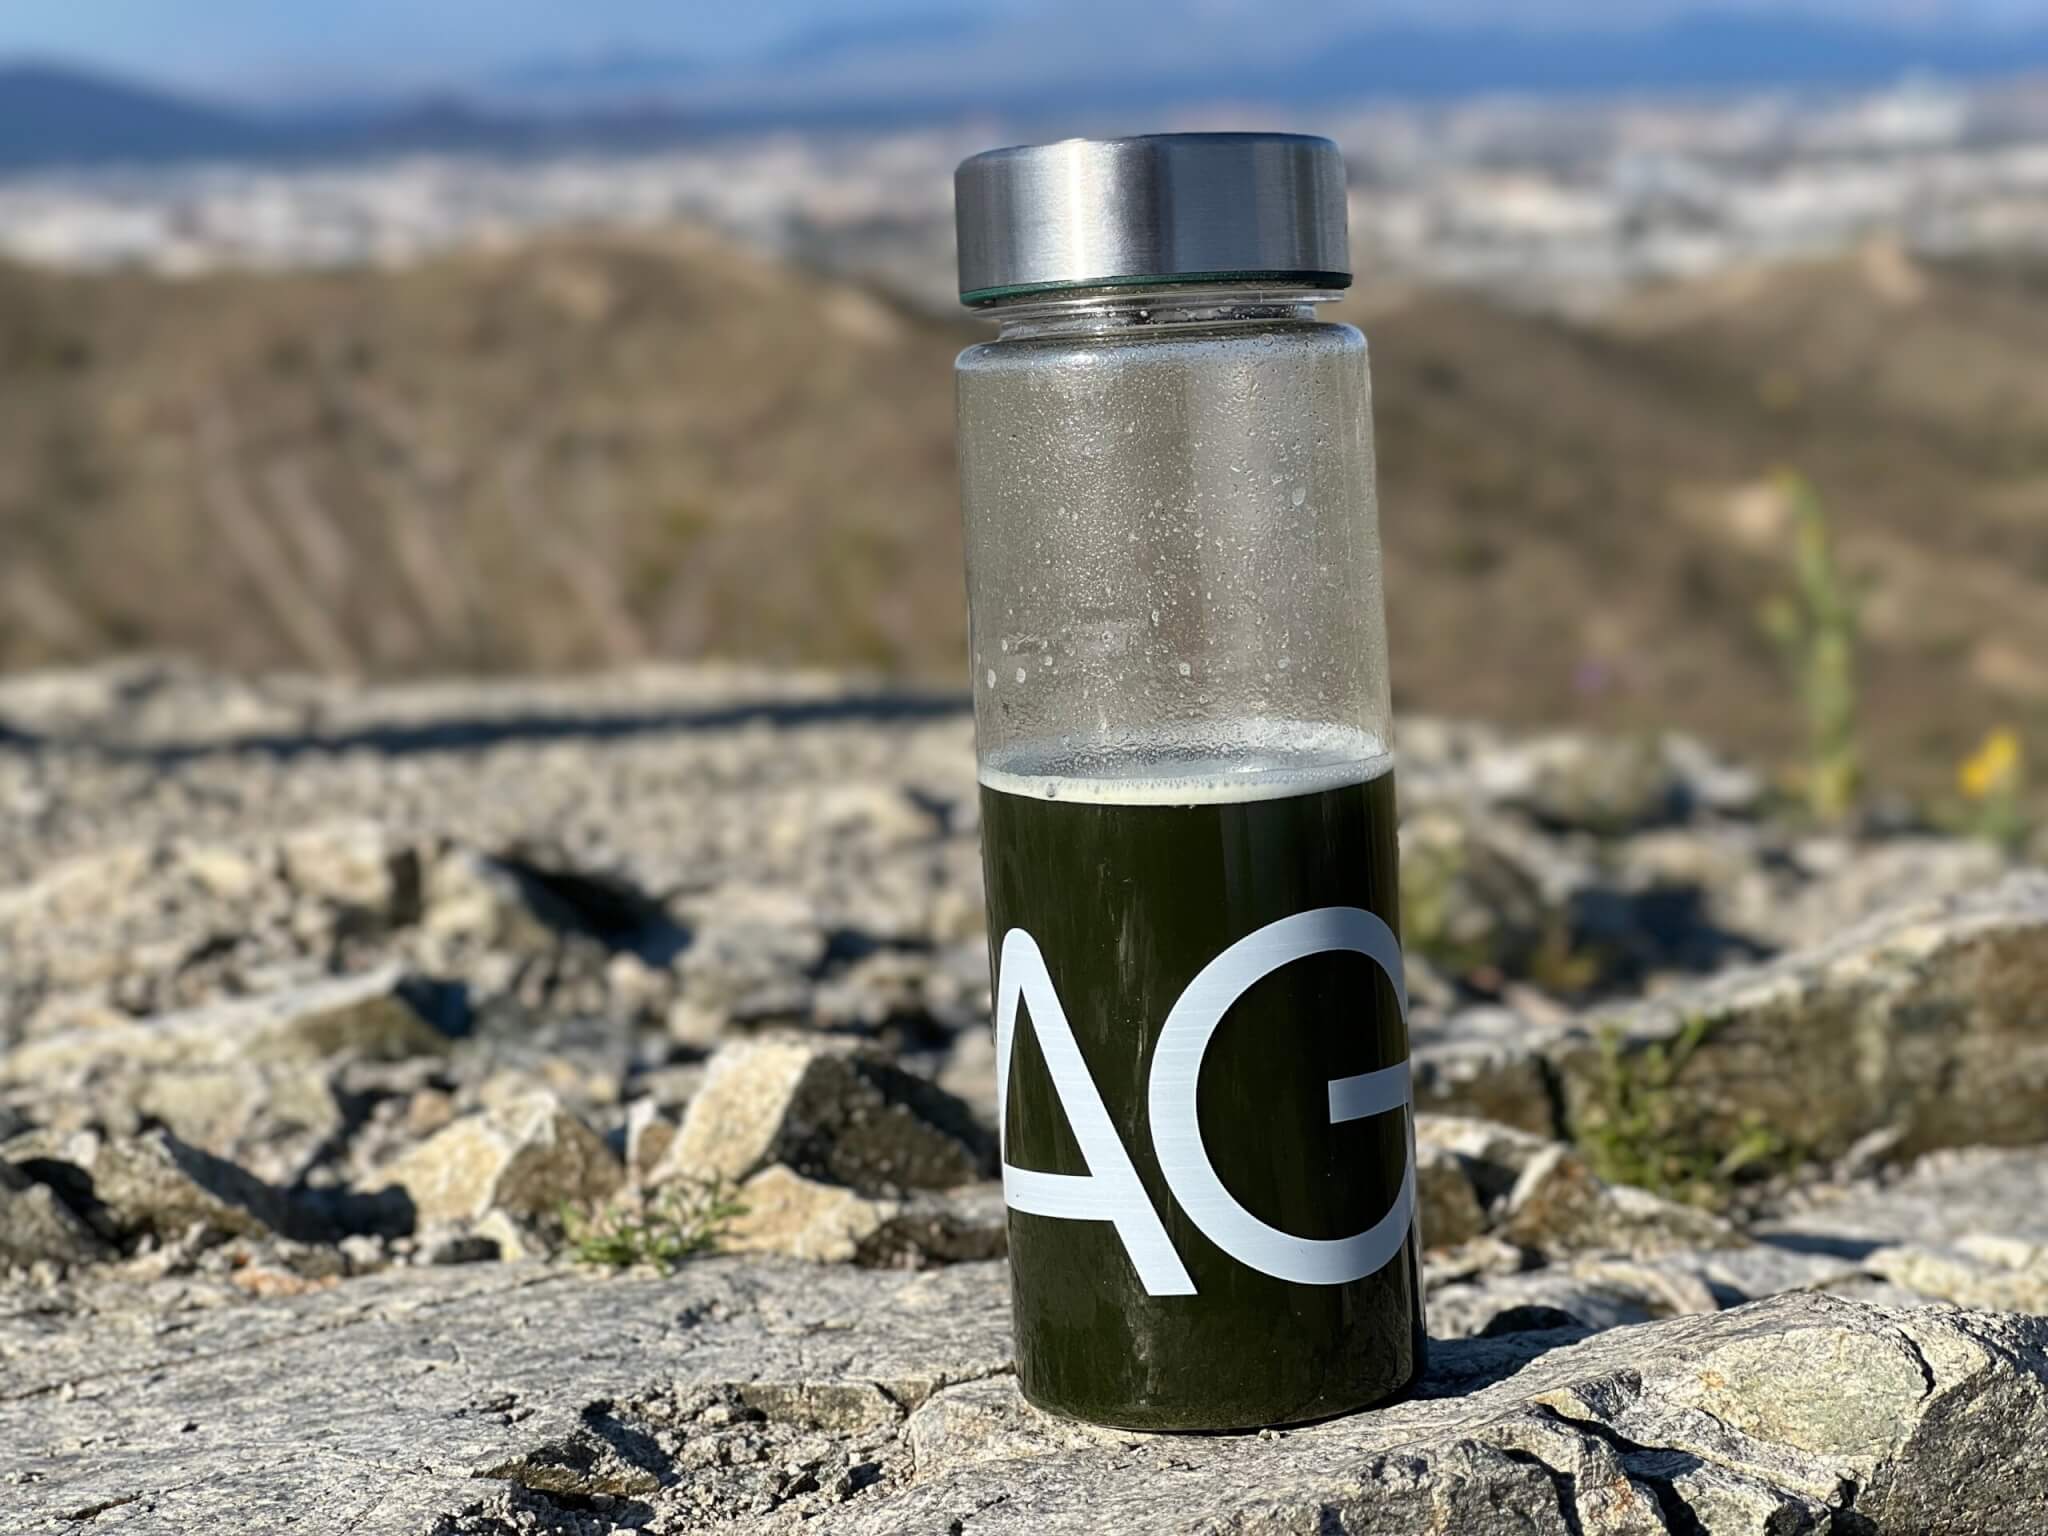 Athletic Greens (AG1) in a bottle